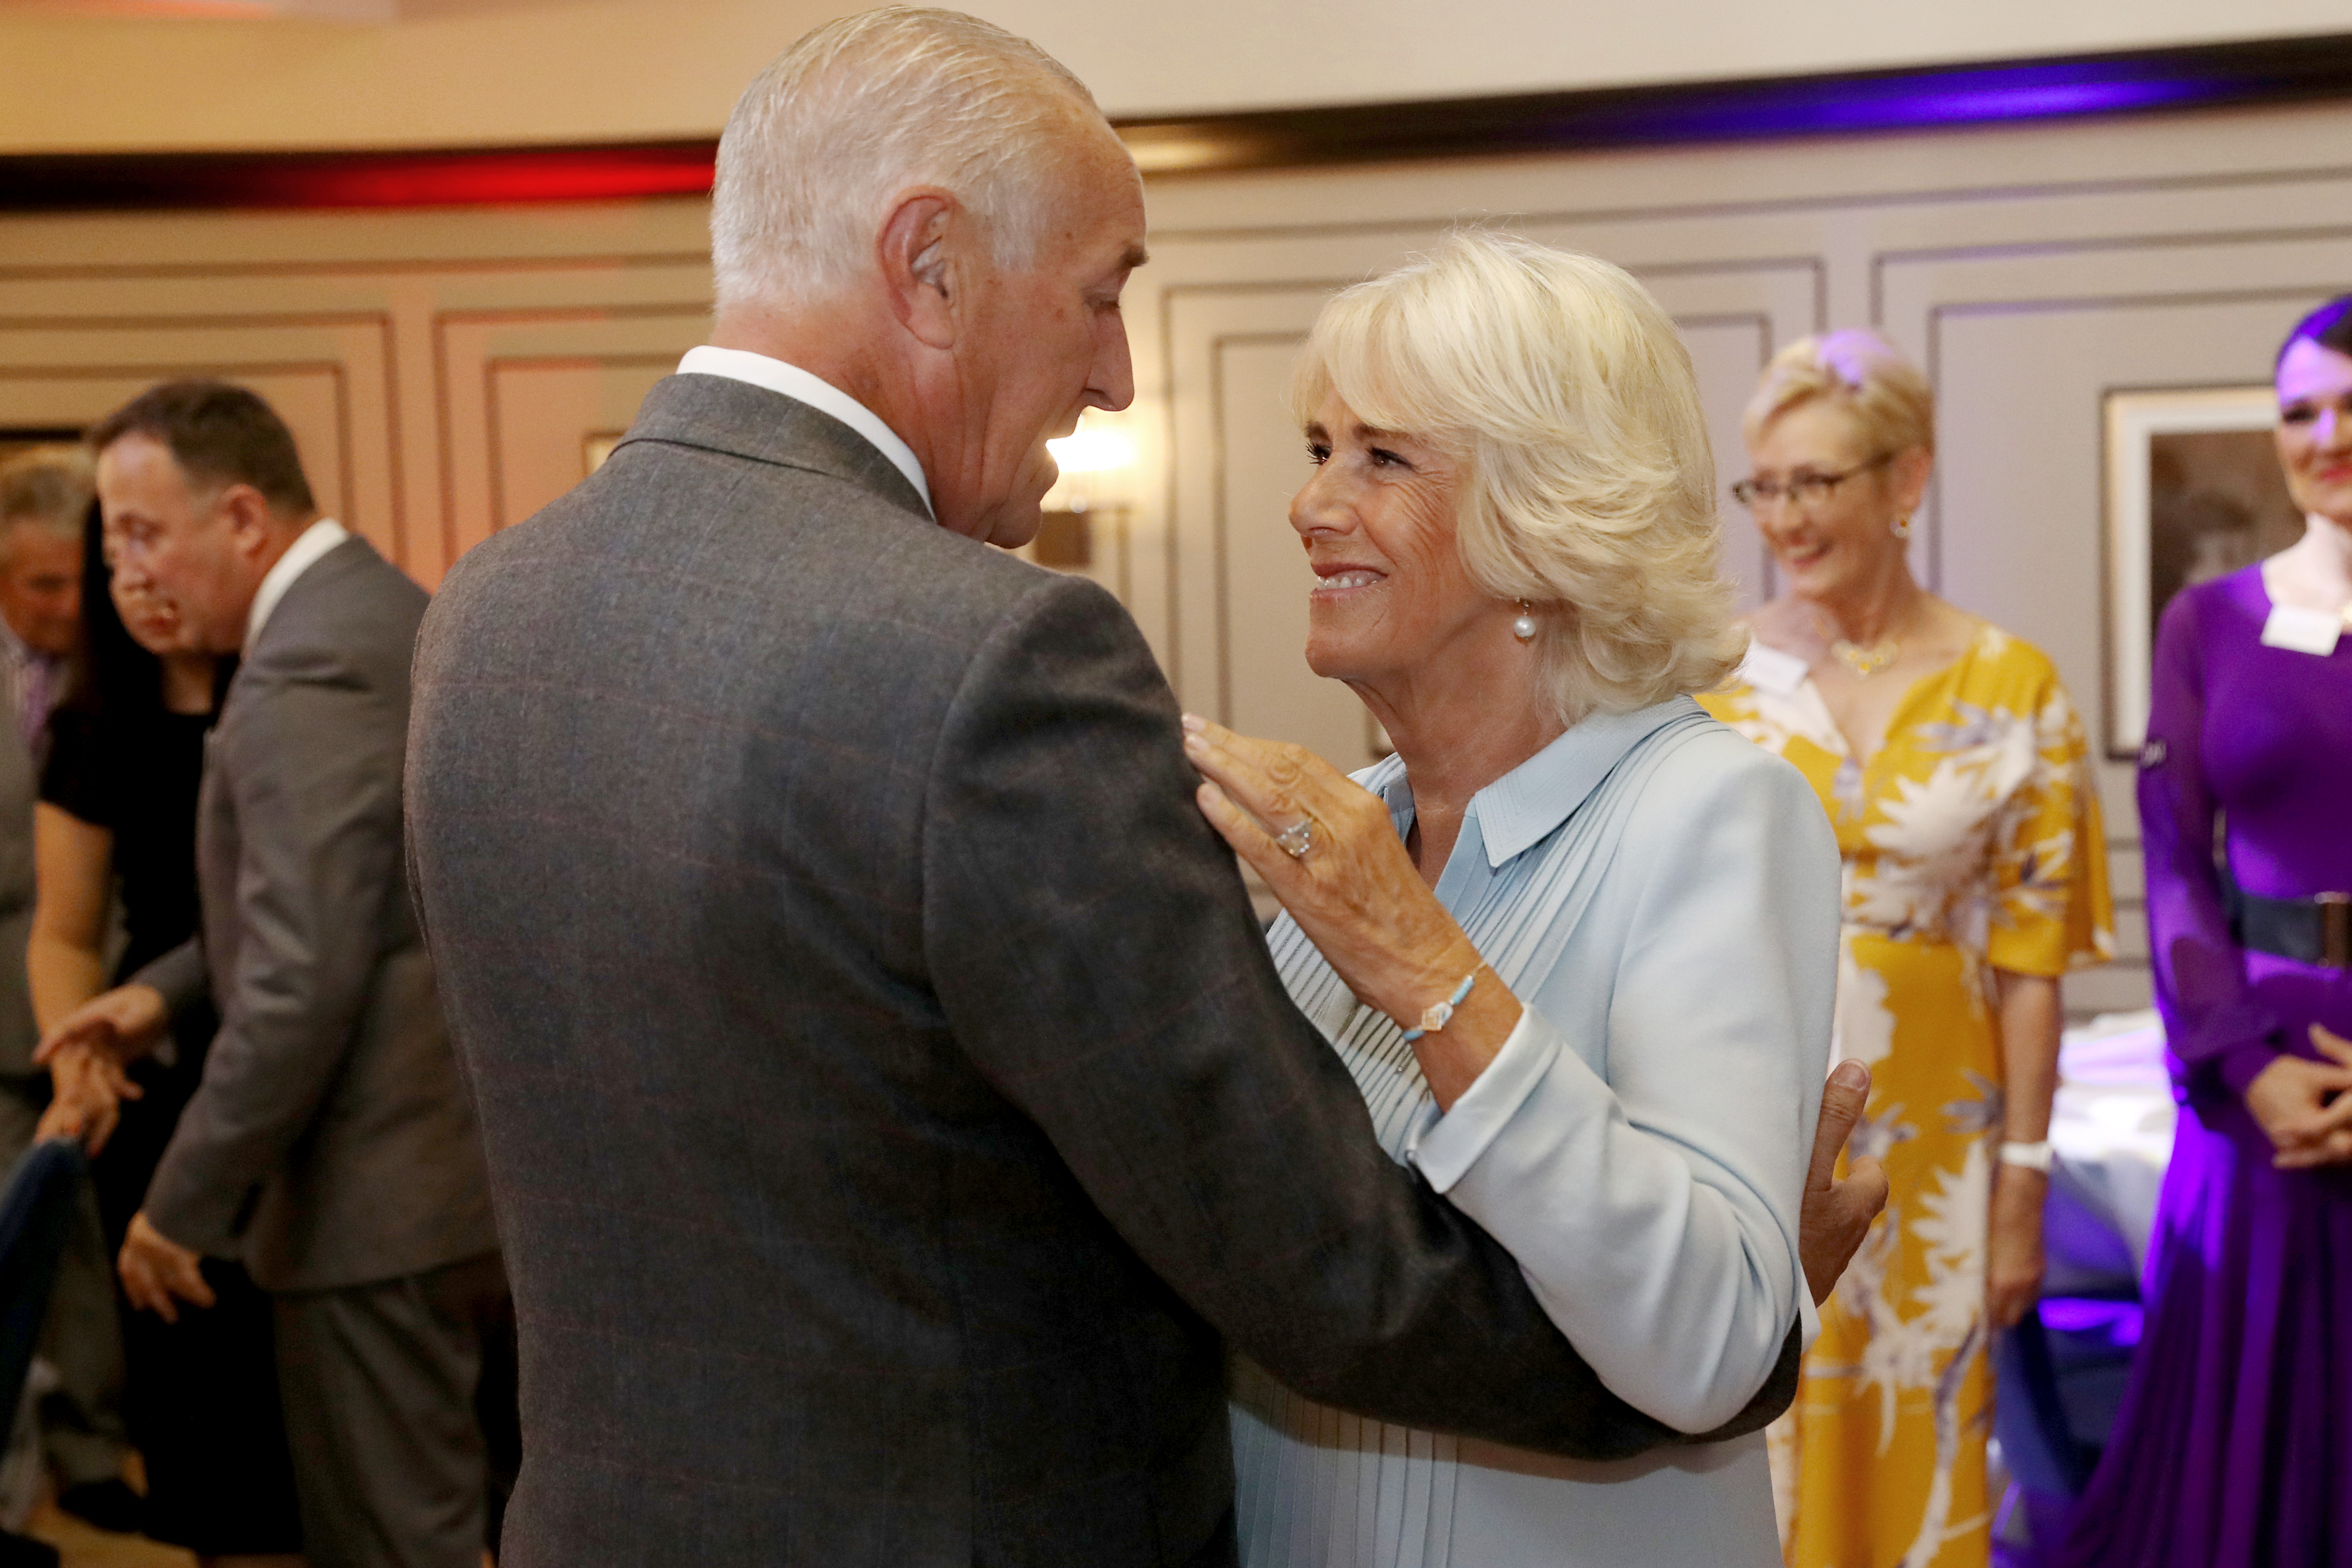 Camilla, Duchess of Cornwall dances with Len Goodman on September 05, 2019 in London, England. | Source: Getty Images